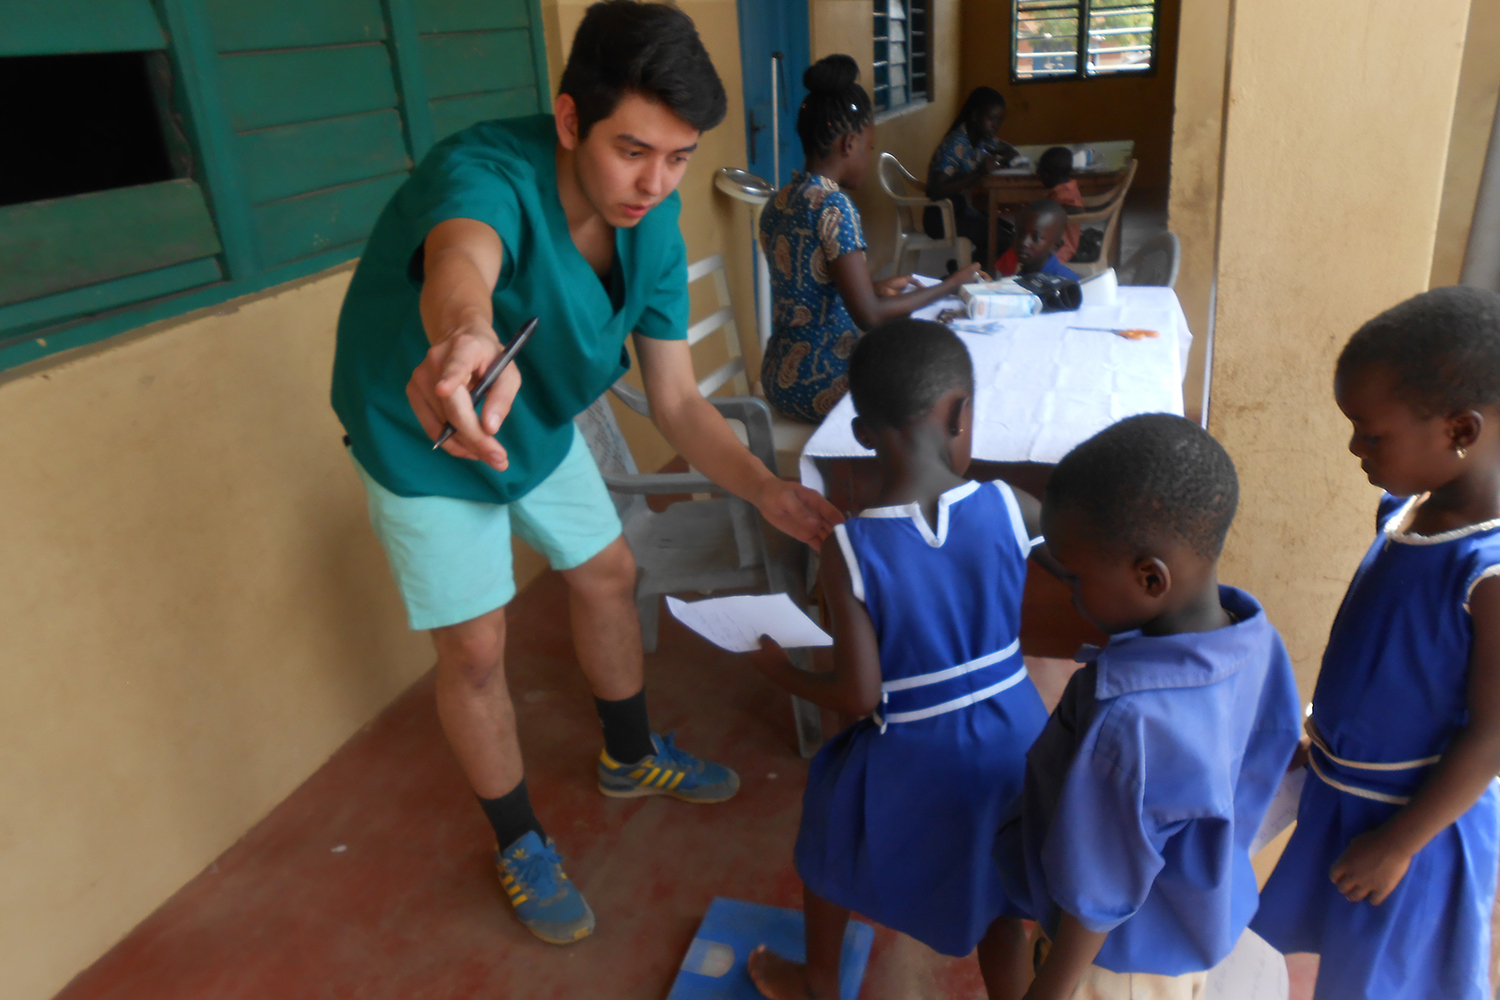 RIT student Josh Holmes was able to make a difference at a hospital in Ghana during a two-week trip.